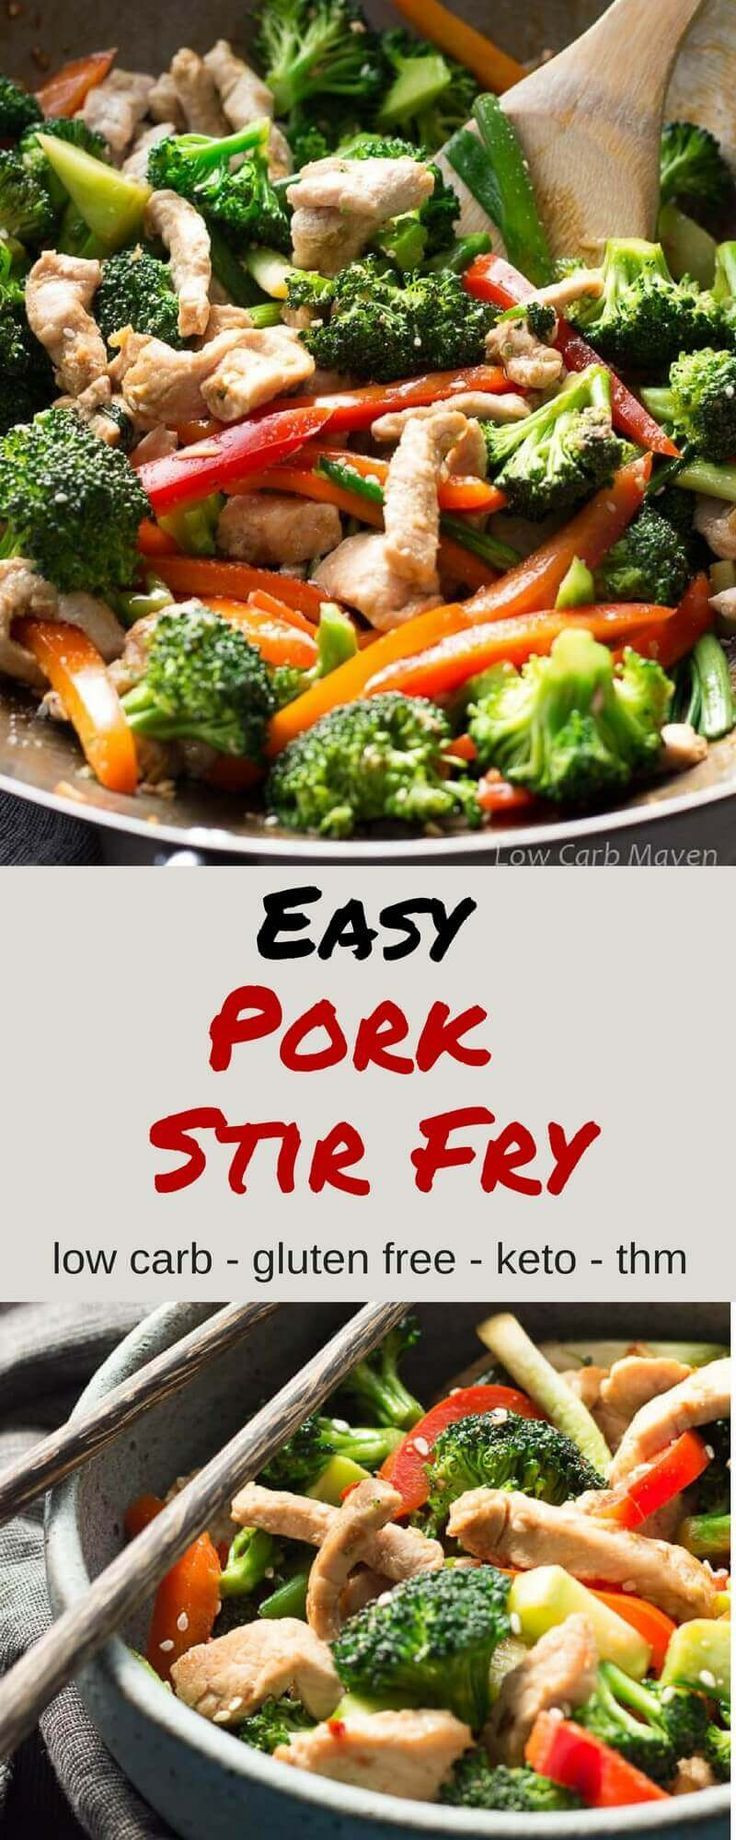 Low Calorie Stir Fry Recipes
 This easy pork stir fry is low carb gluten free keto and